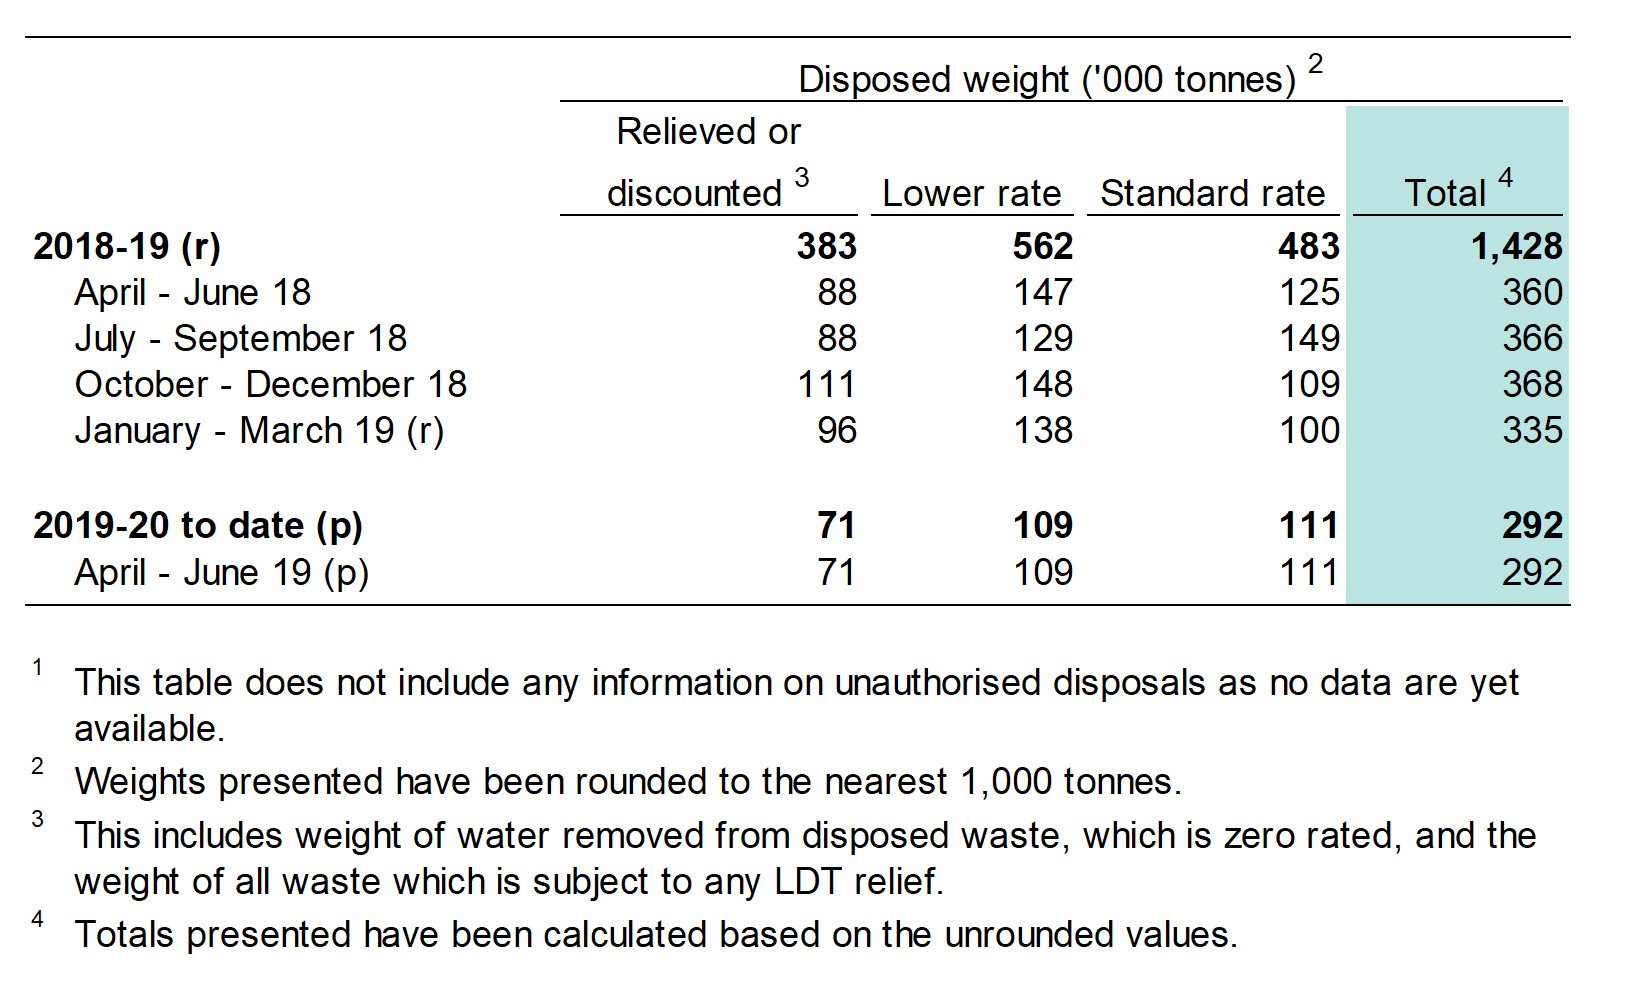 Table 1a shows the weight of waste disposed to landfill, by tax rate and by quarter.